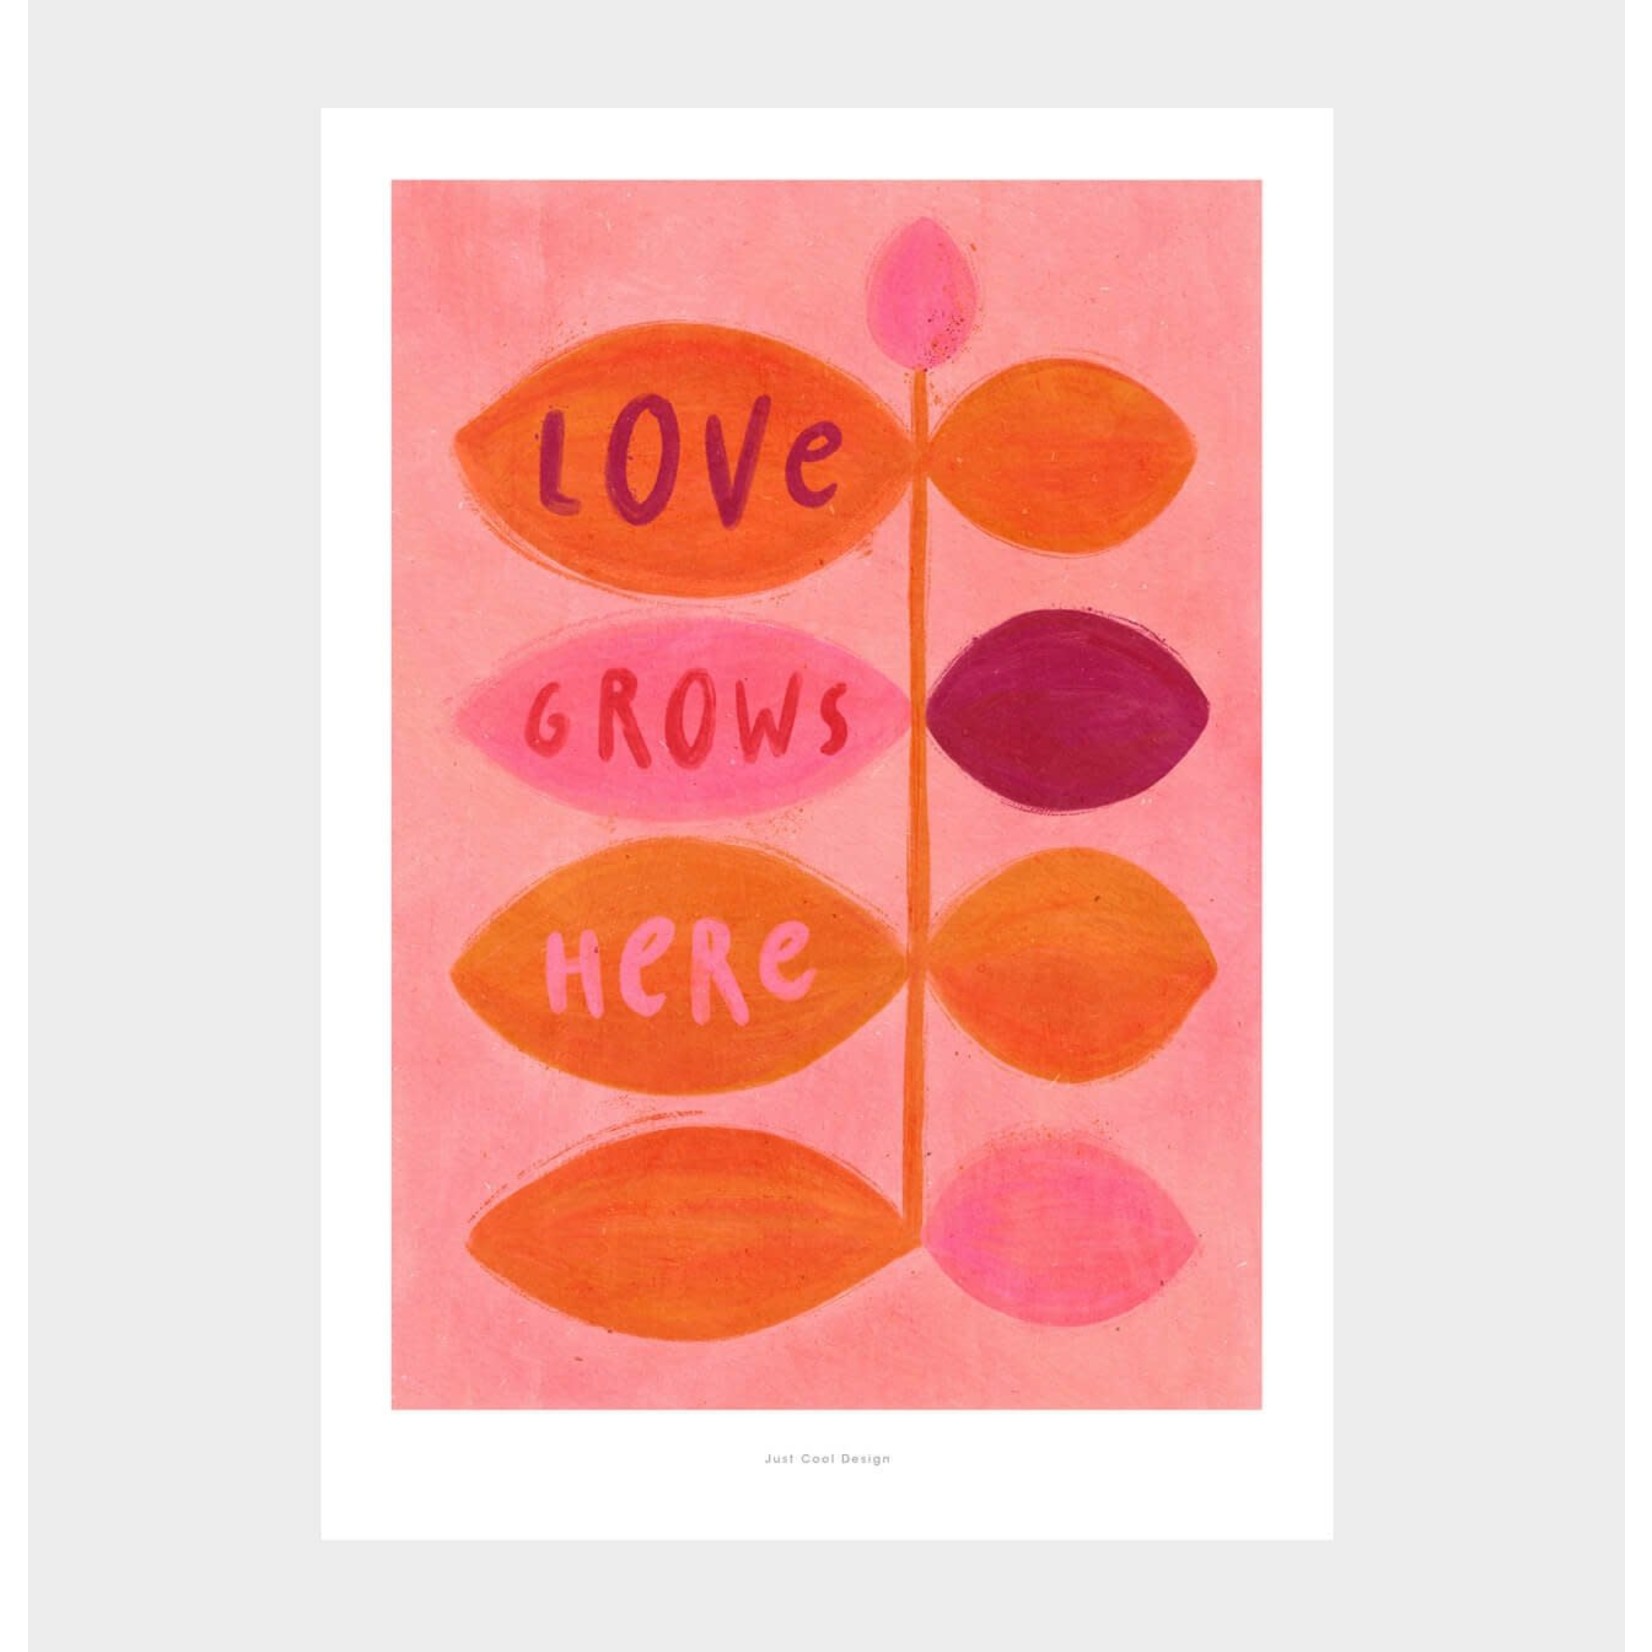 Just Cool Design A5 Love grows here | Illustration Poster Art Print